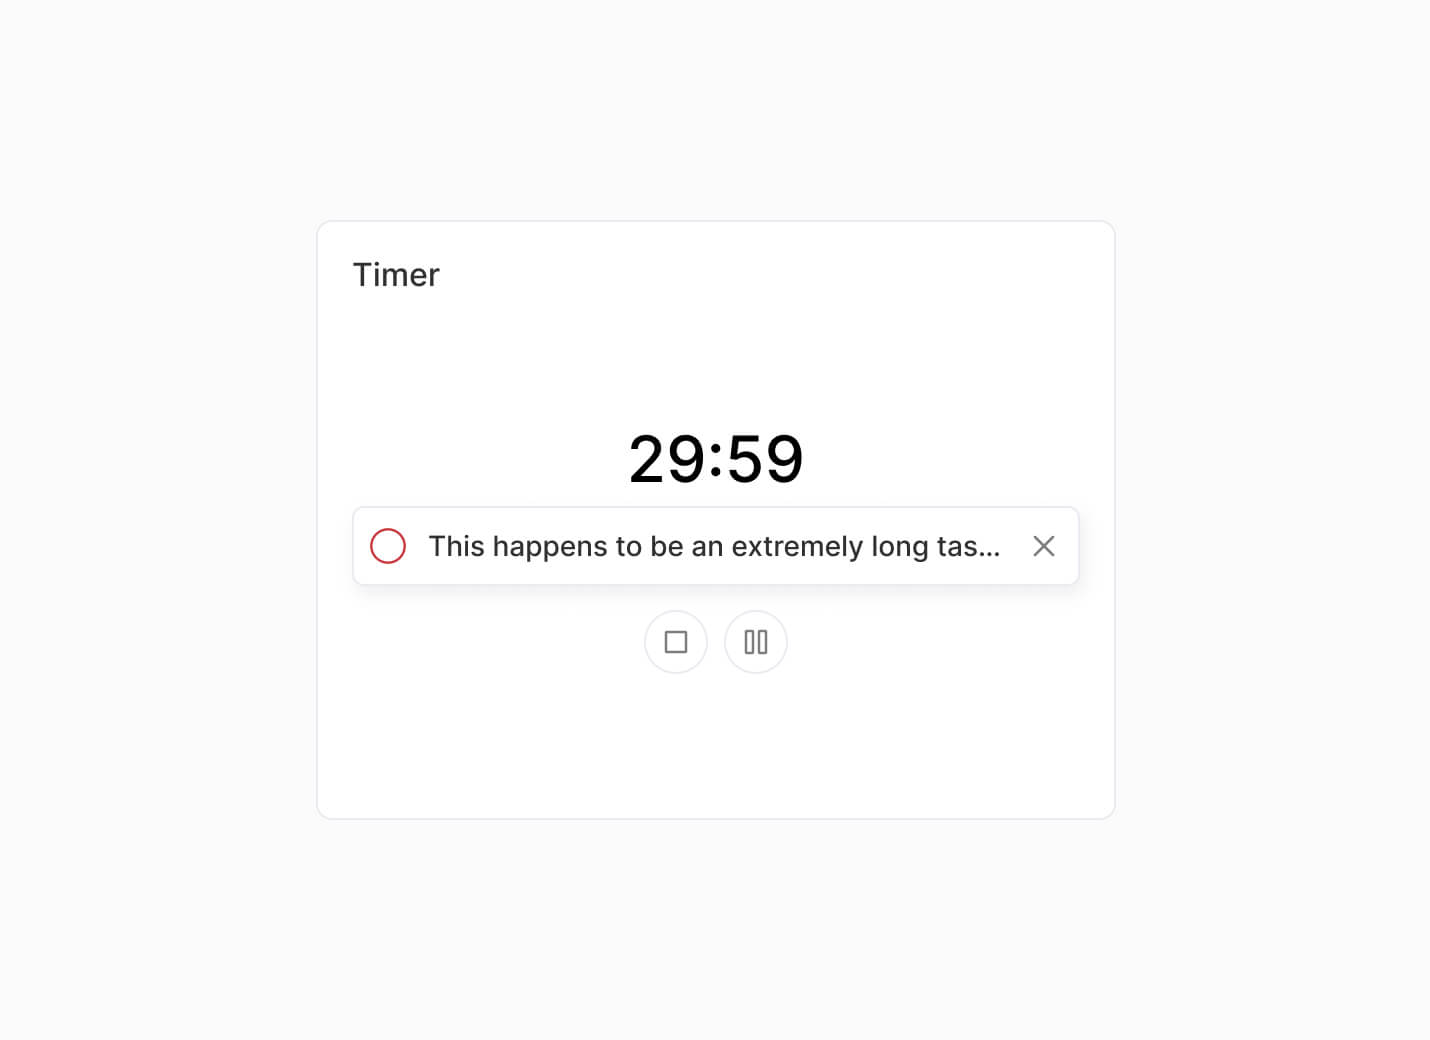 Edge case of a long task title in a timer block